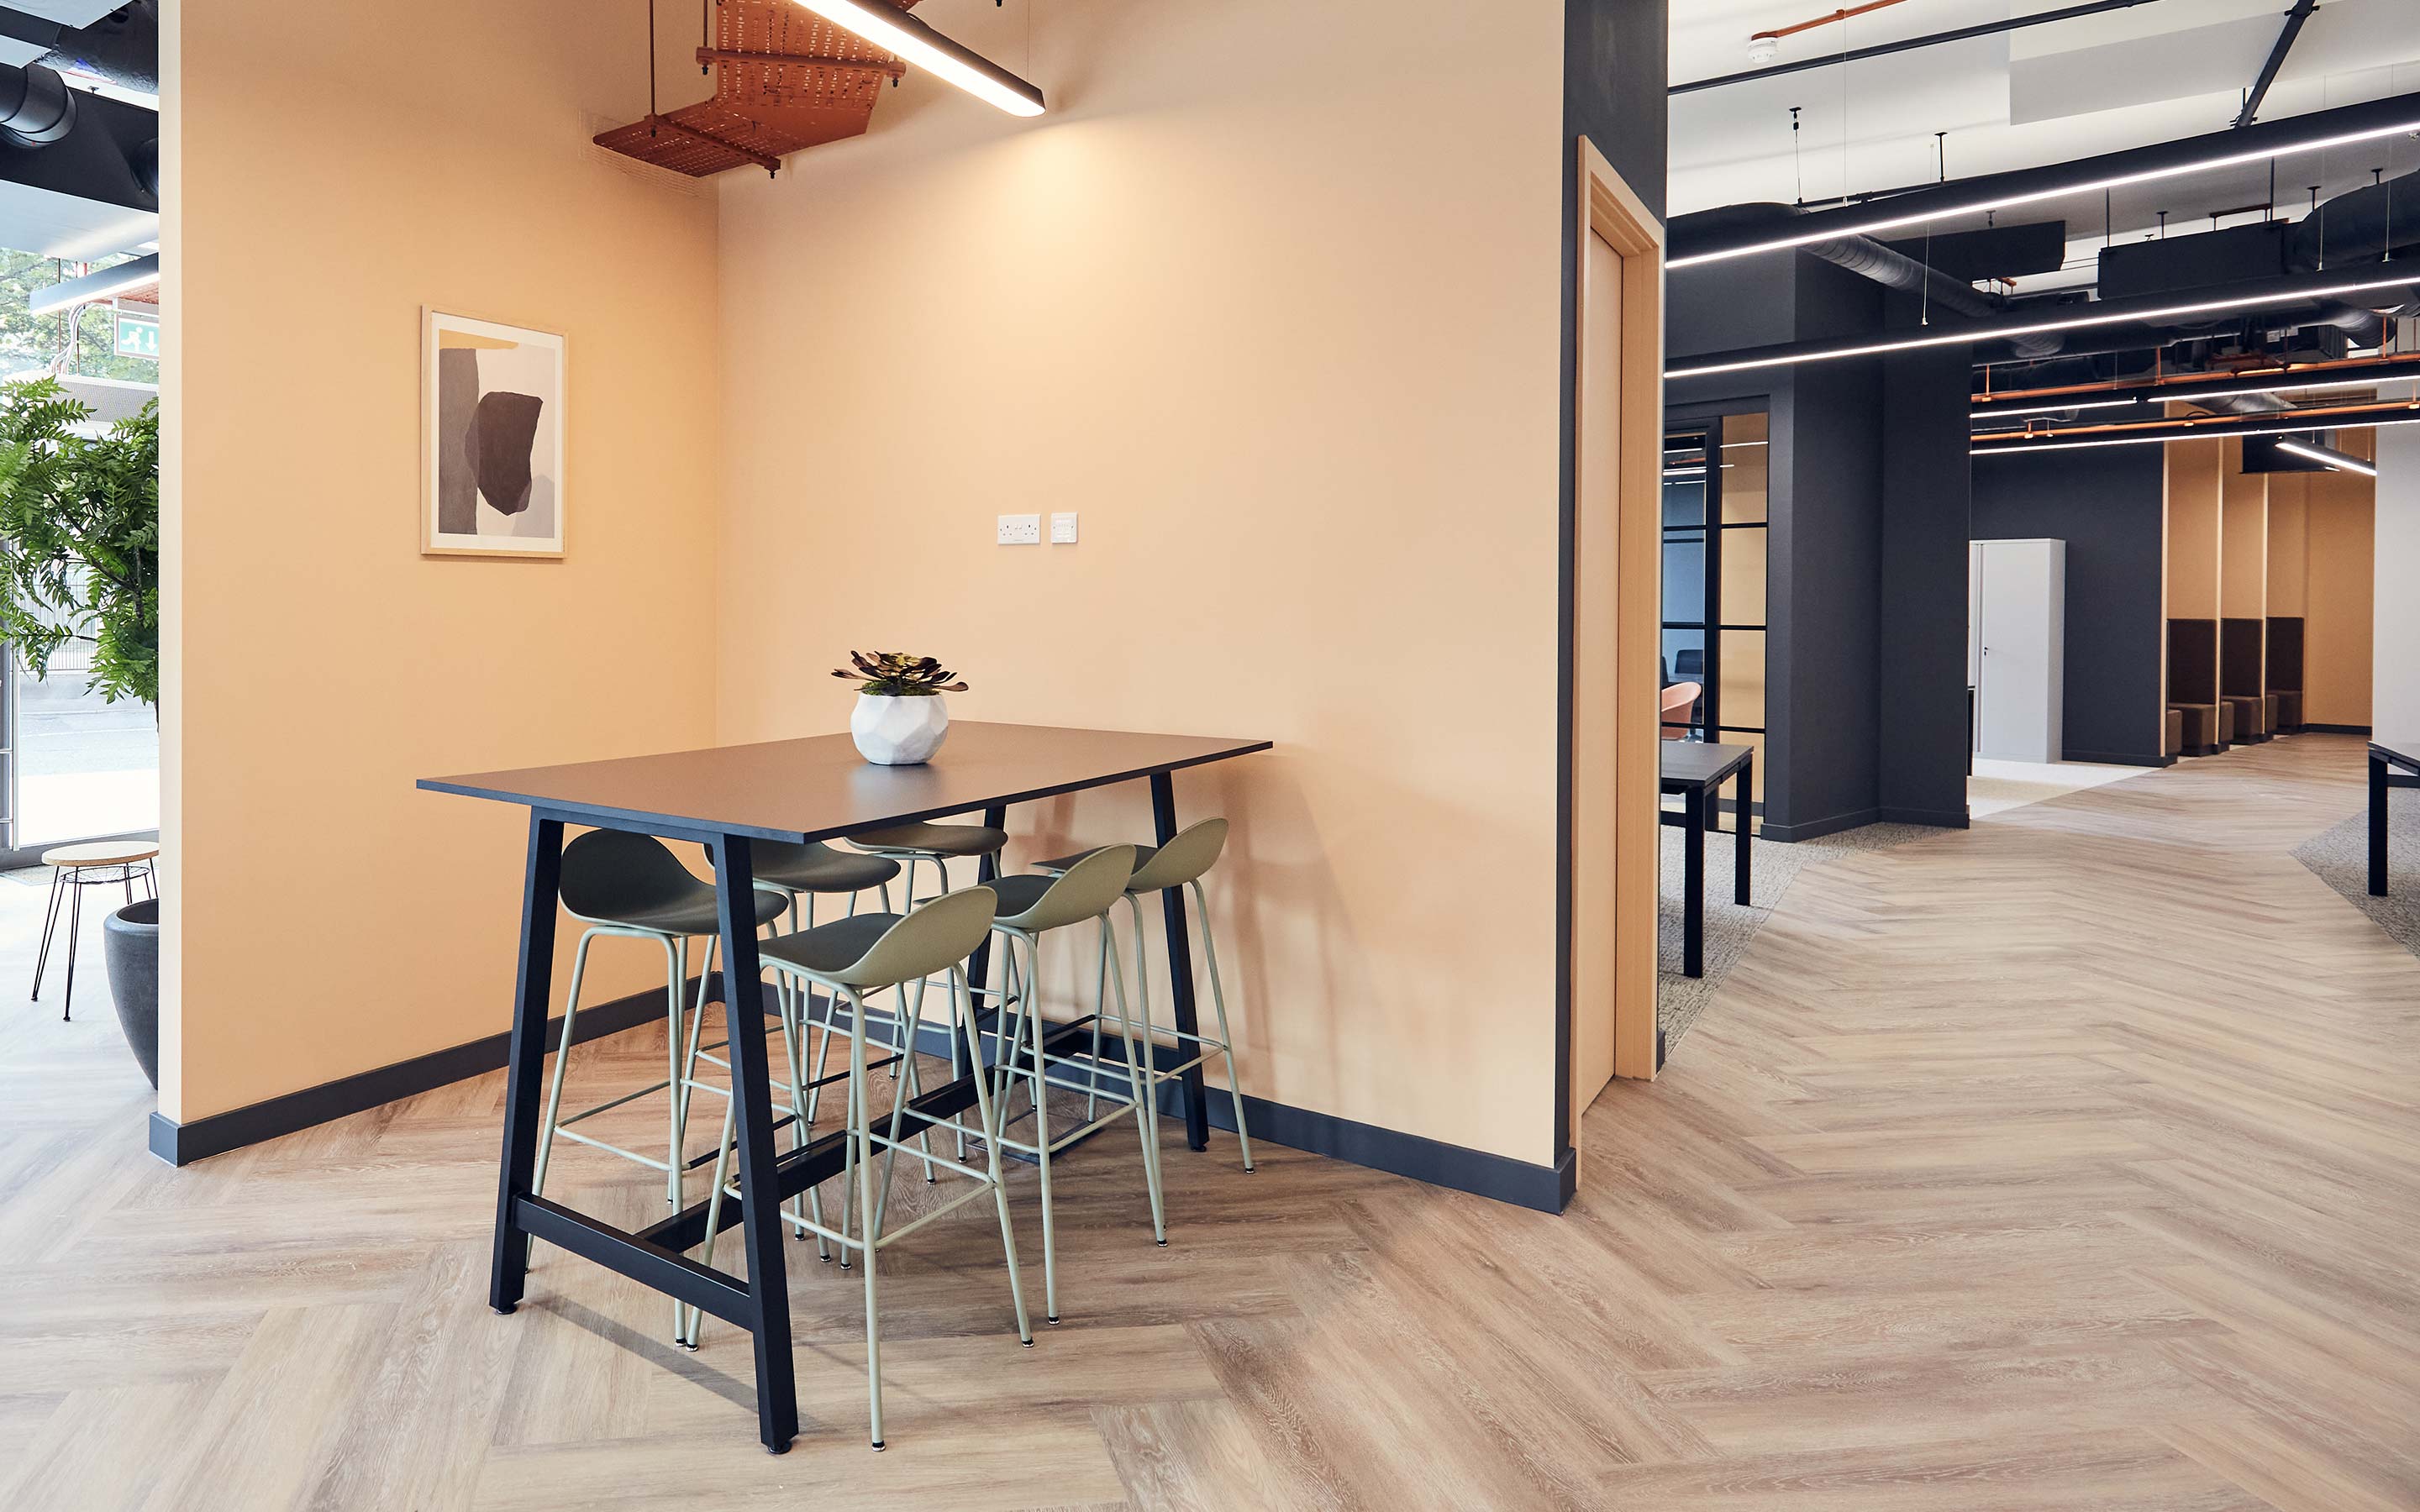 The image shows a high table and stools in an office breakout area, with peach coloured walls and wooden flooring